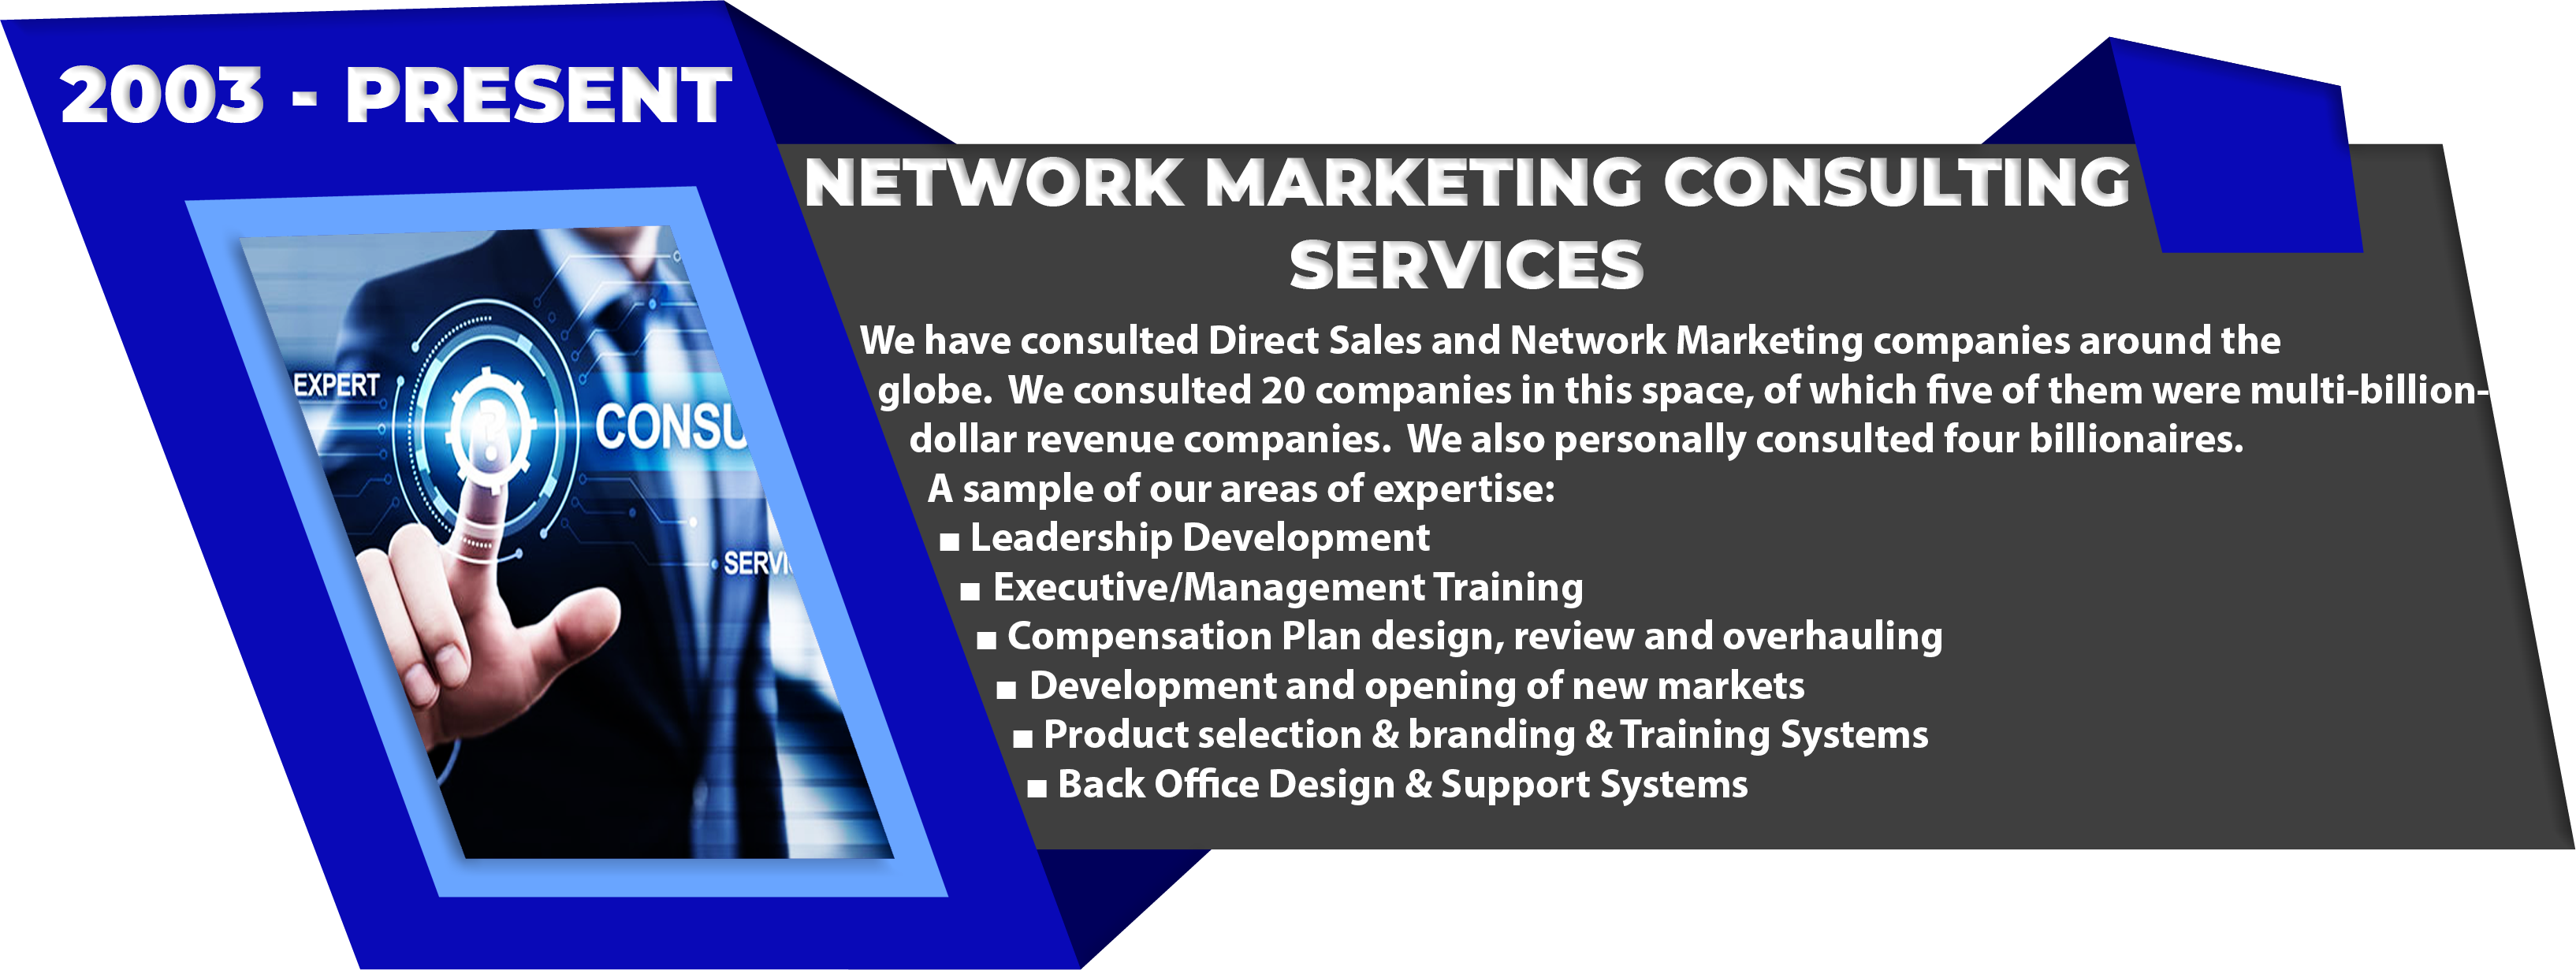 Network Marketing Consulting Services 2003 – Present